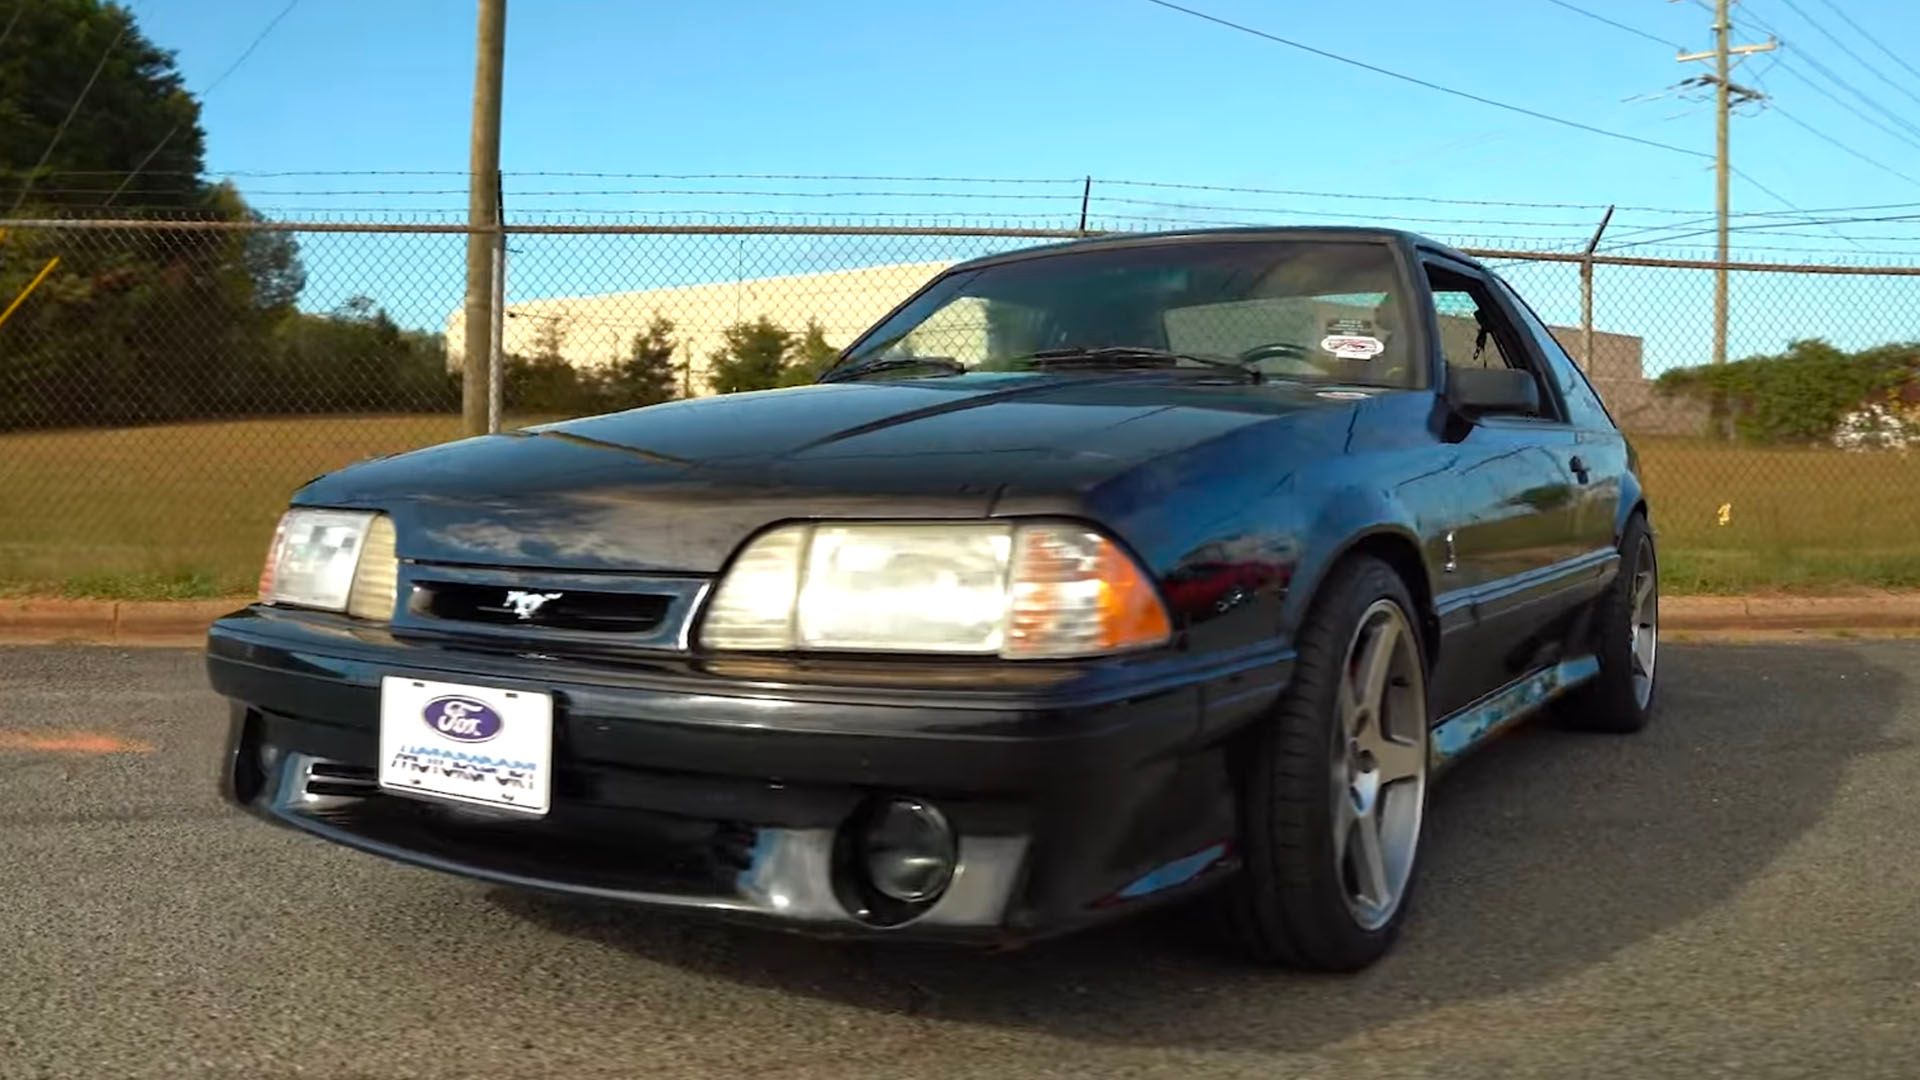 Black supercharged fox body Ford Mustang